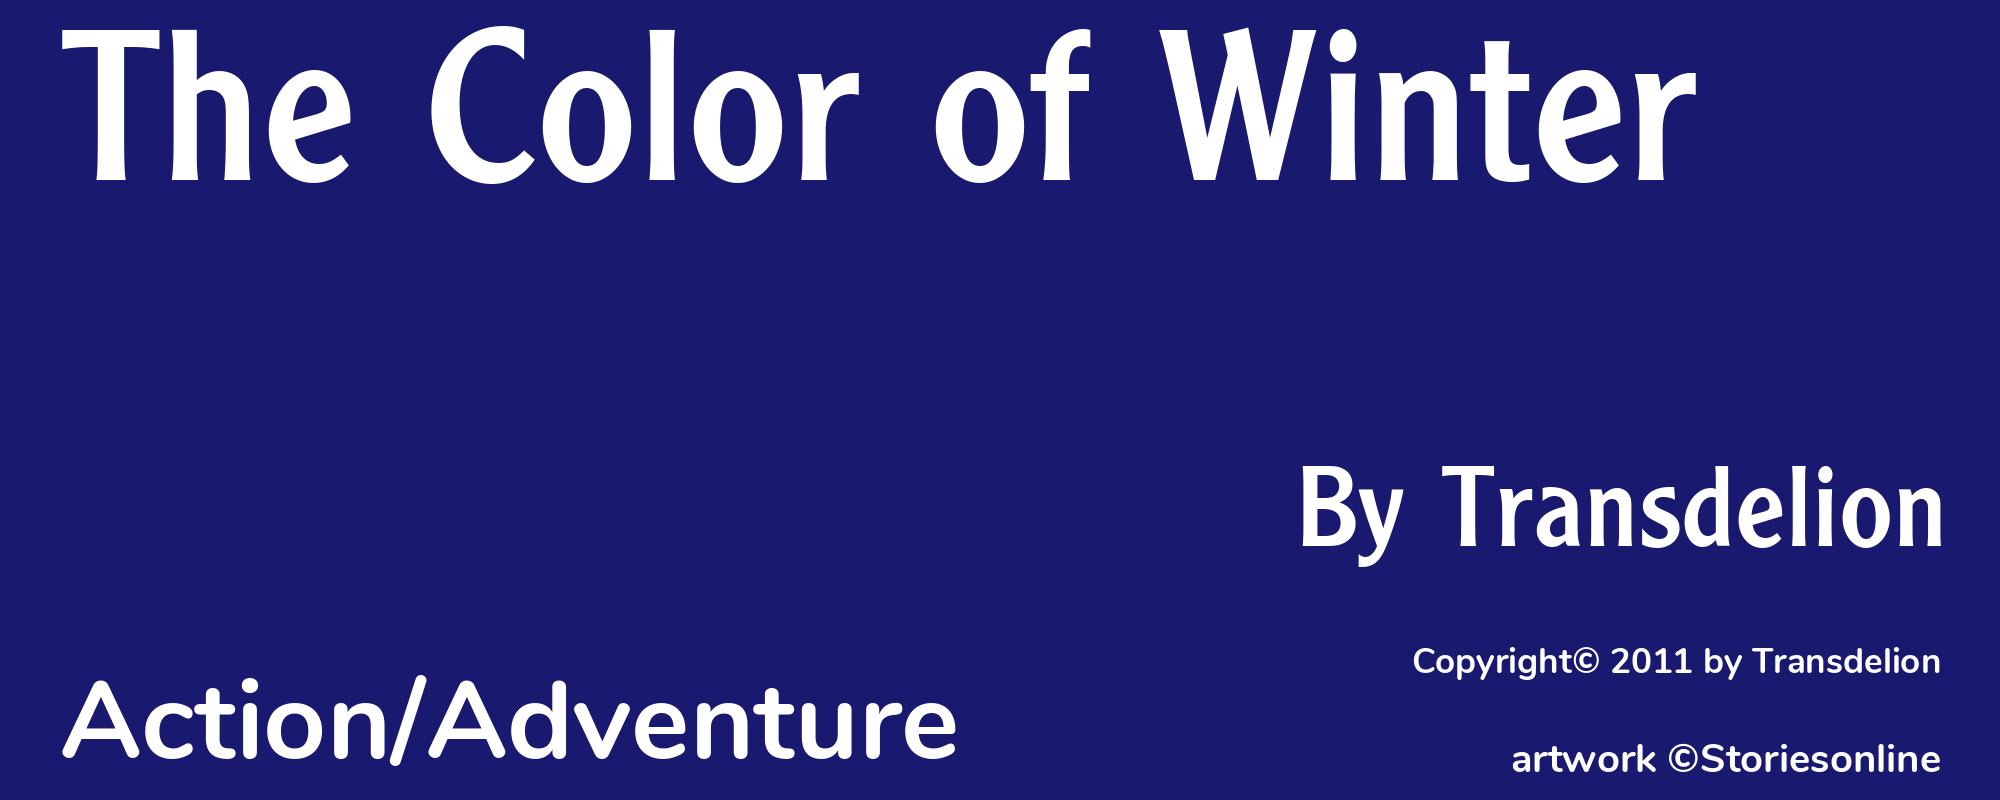 The Color of Winter - Cover